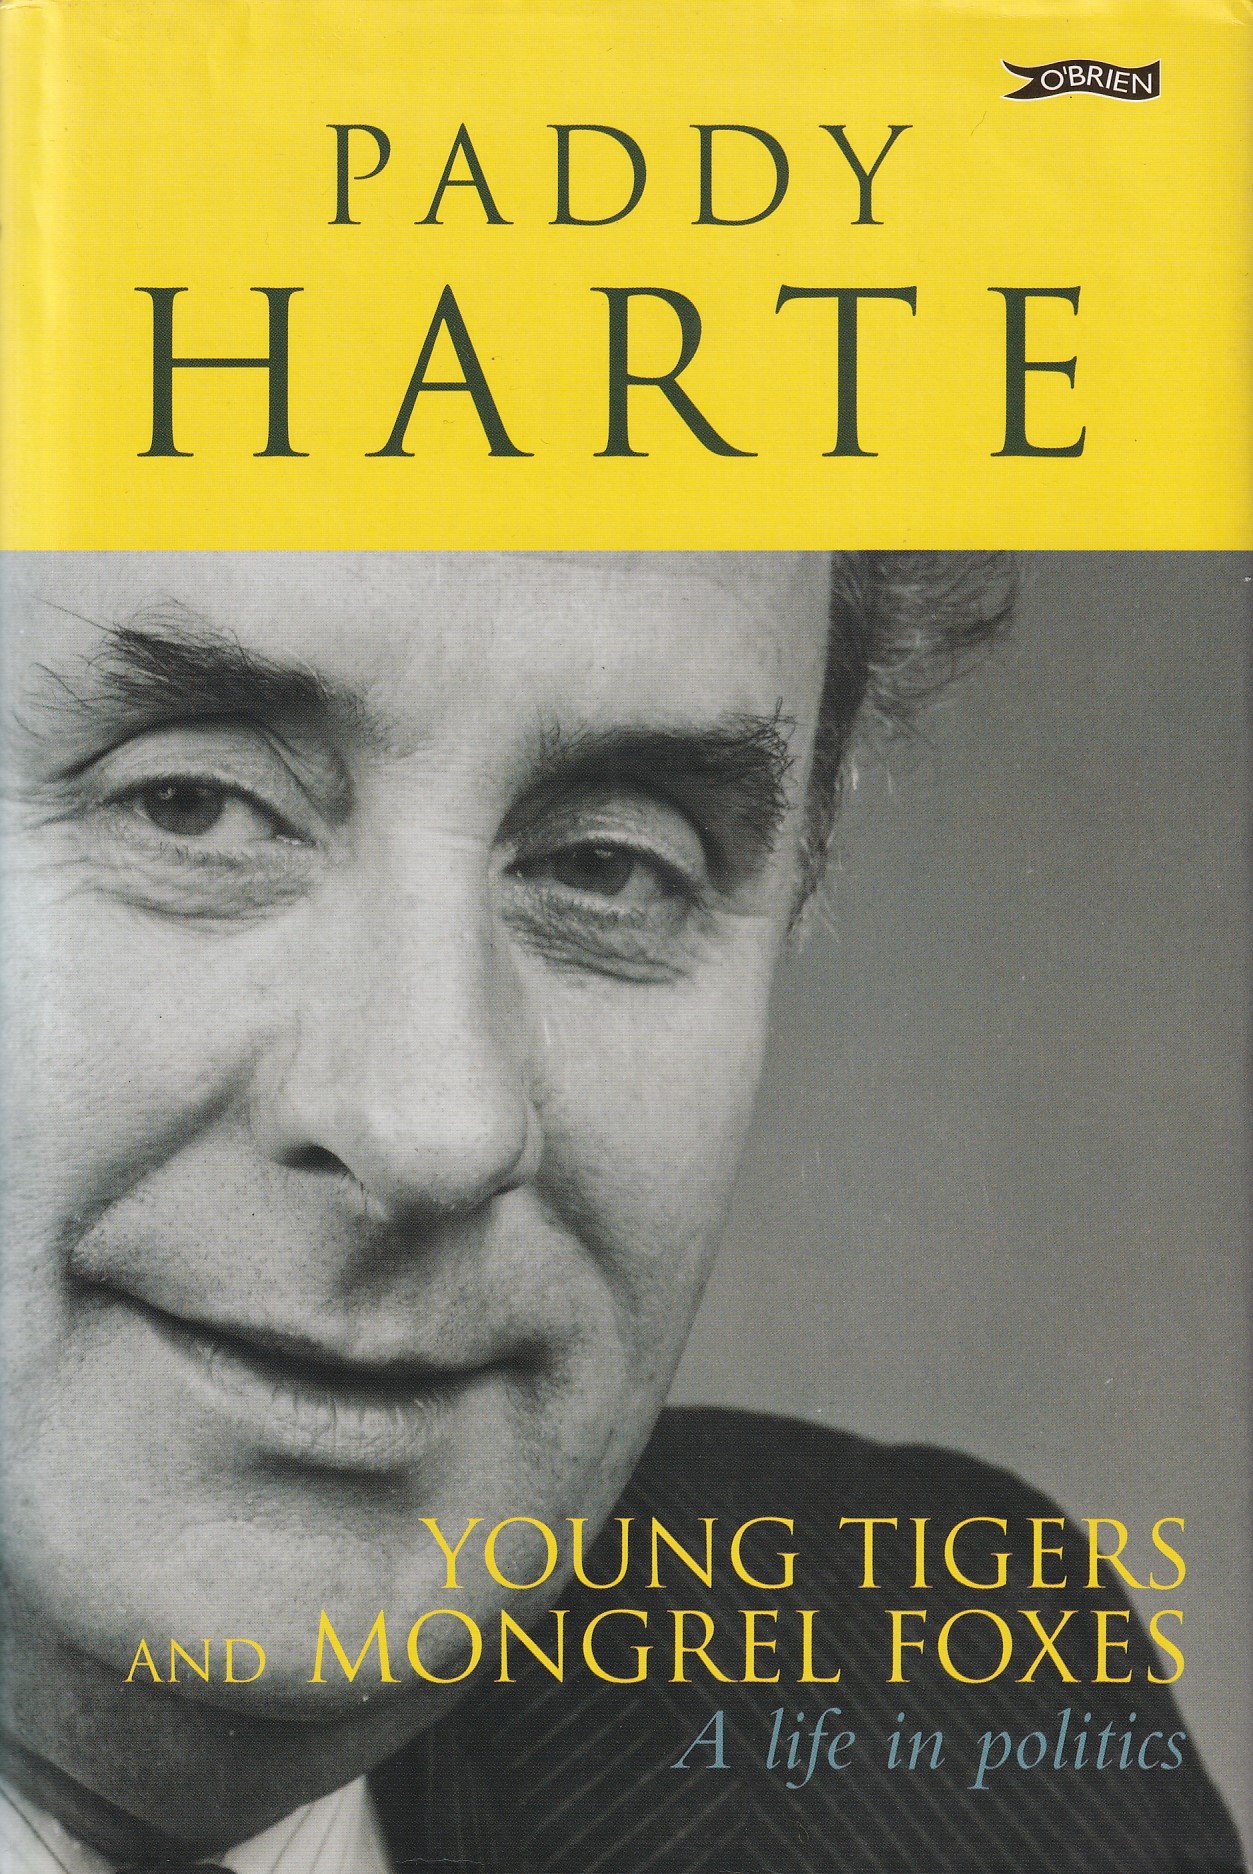 Young Tigers and Mongrel Foxes: A Life in Politics | Paddy Harte | Charlie Byrne's